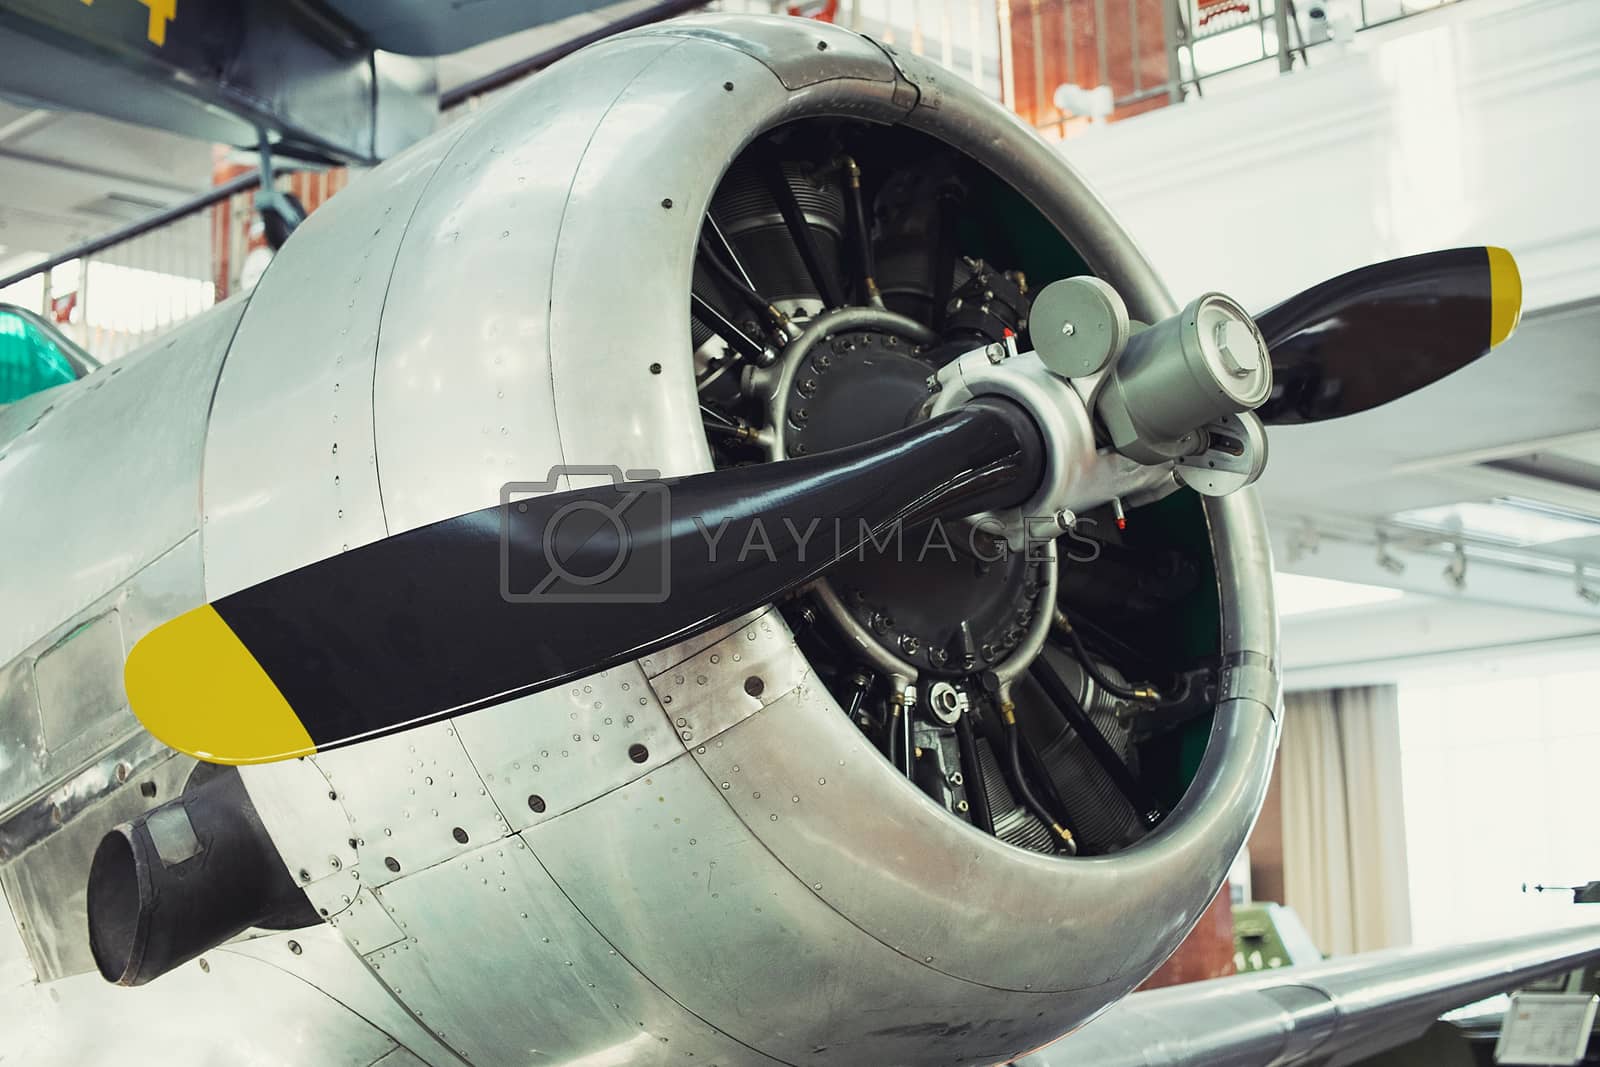 Royalty free image of The propeller of the plane by 3KStudio